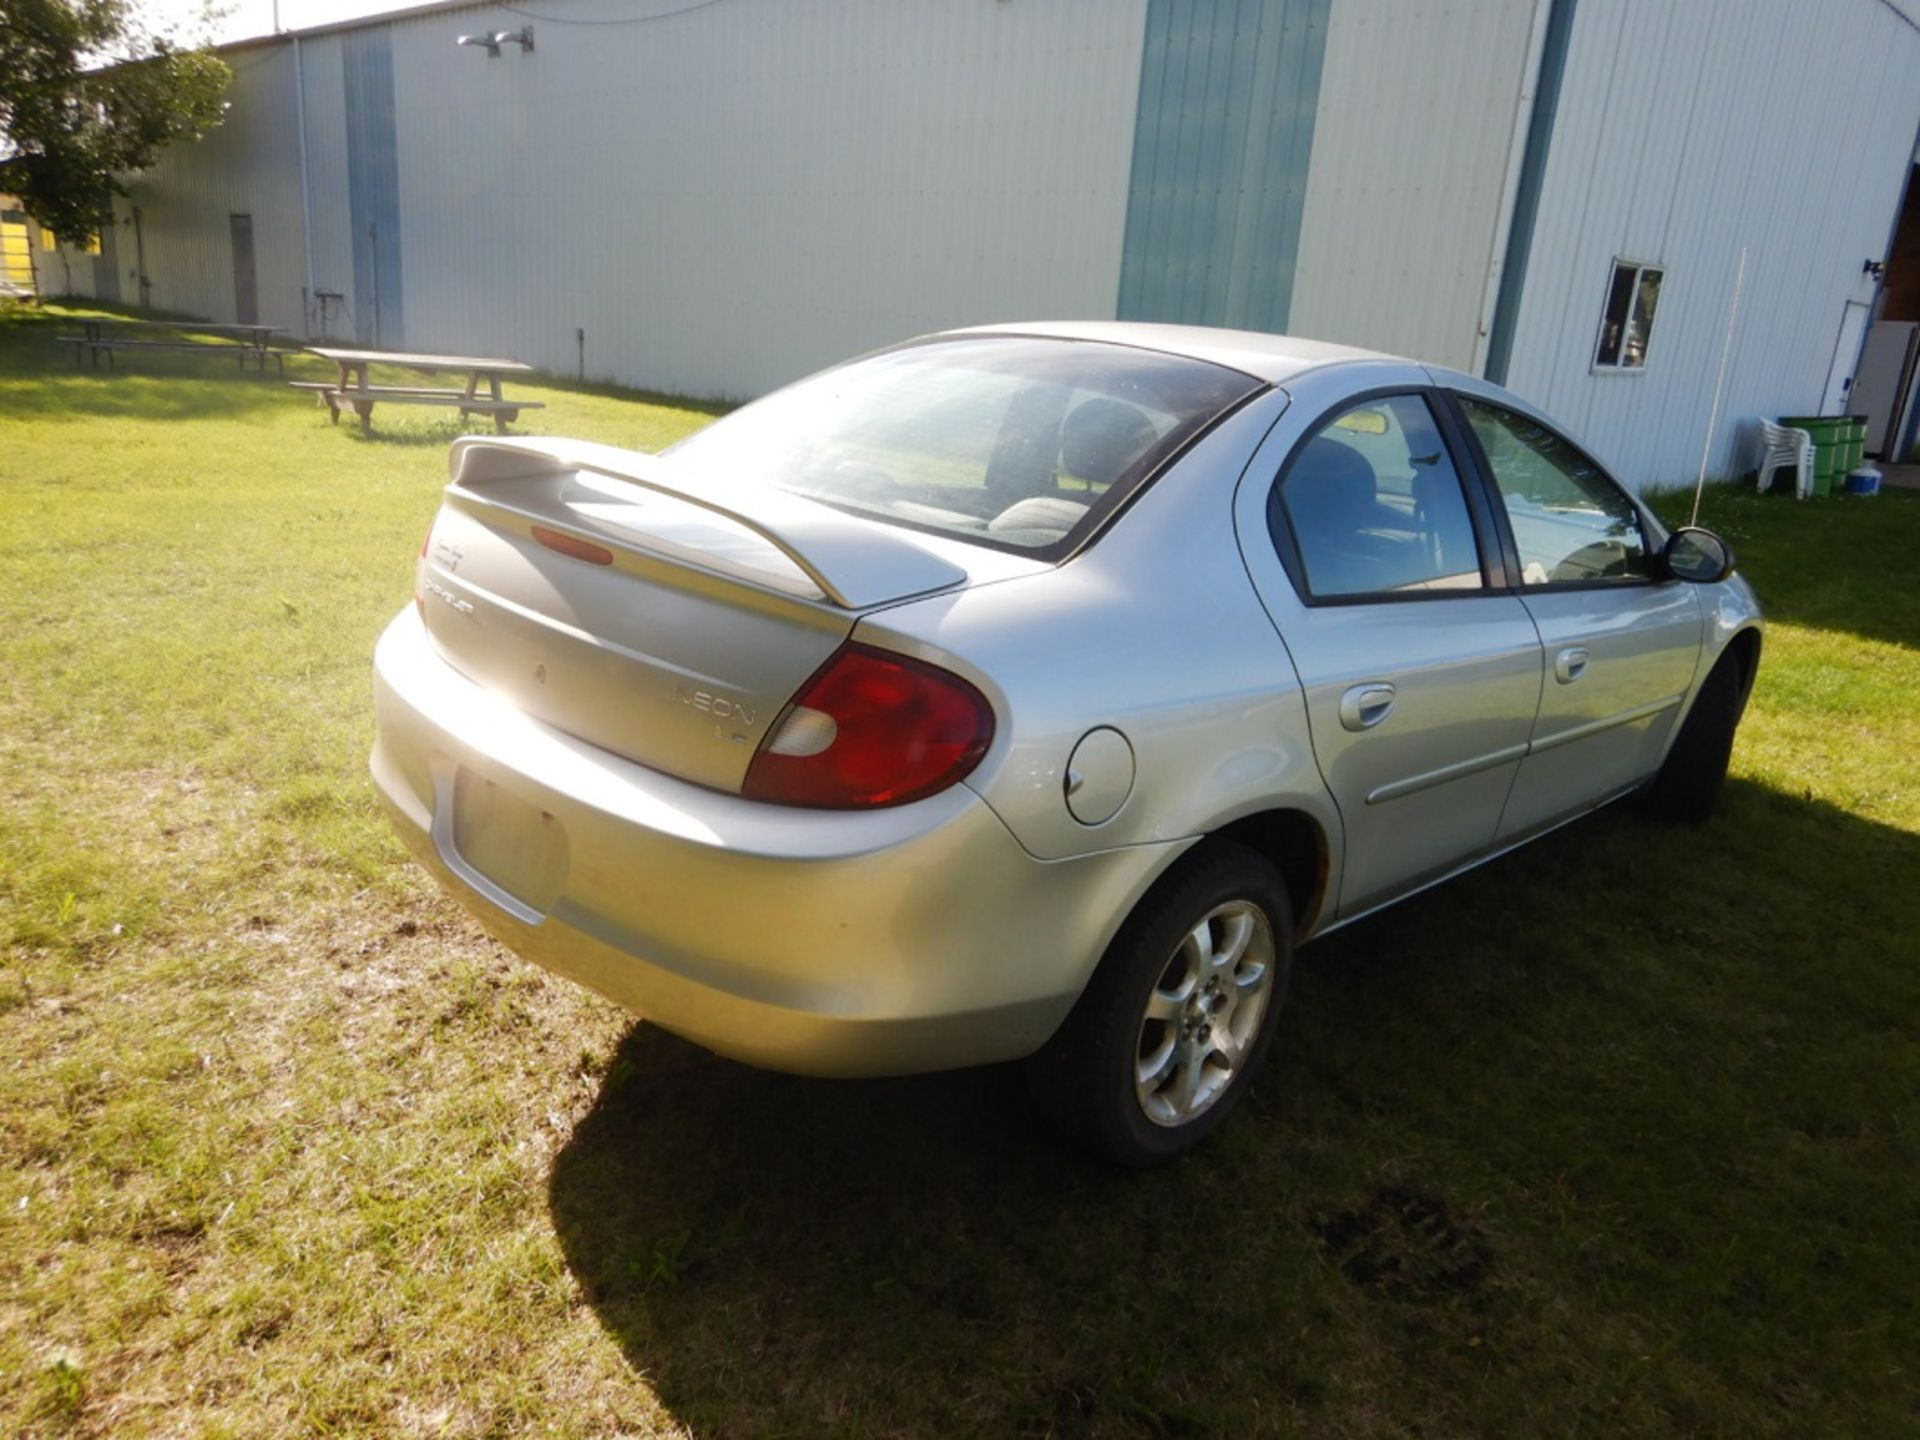 2002 CHRYLSER NEON LE 4 DR. SEDAN S/N 1C3ES46C62D594392, 132854 KM 2.0 L-4CYD. 4-SPD AUTOMATIC - Image 2 of 7